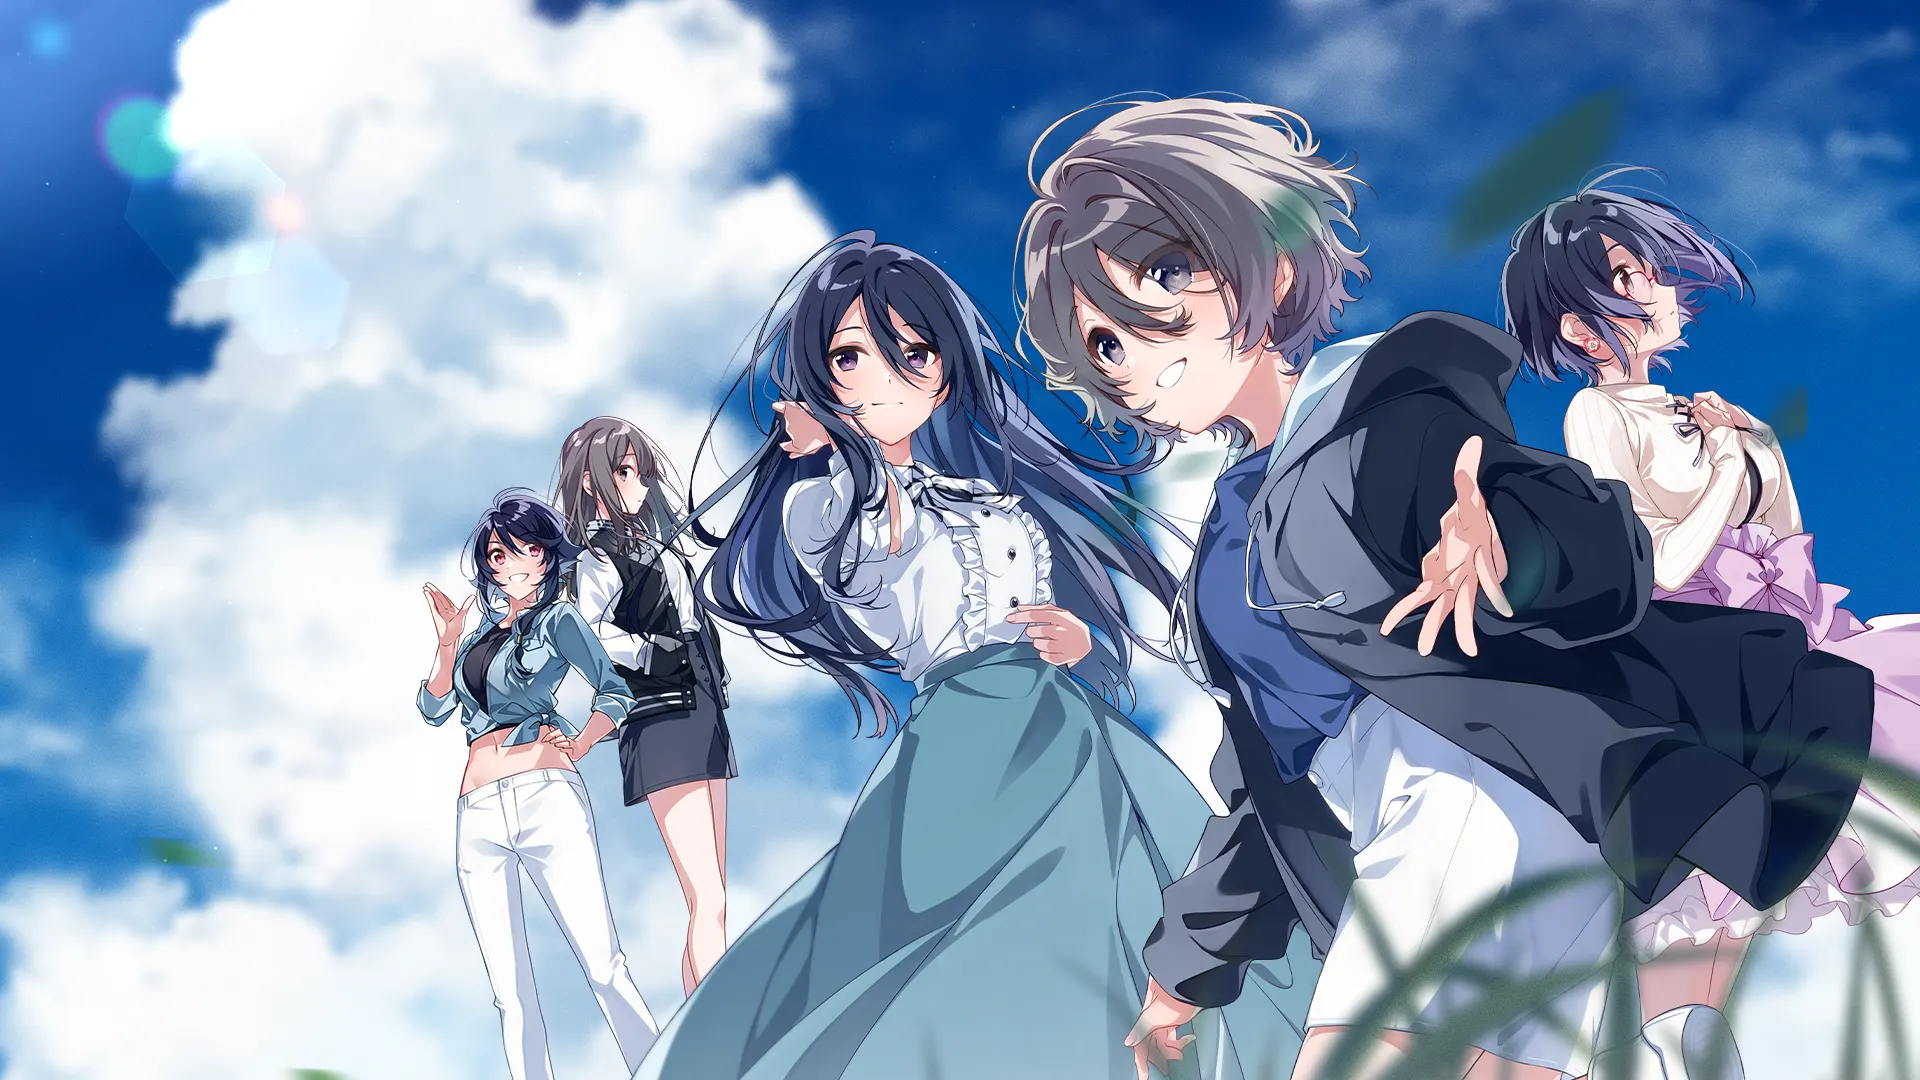 SINce Memories: Off the Starry Sky to receive English release 